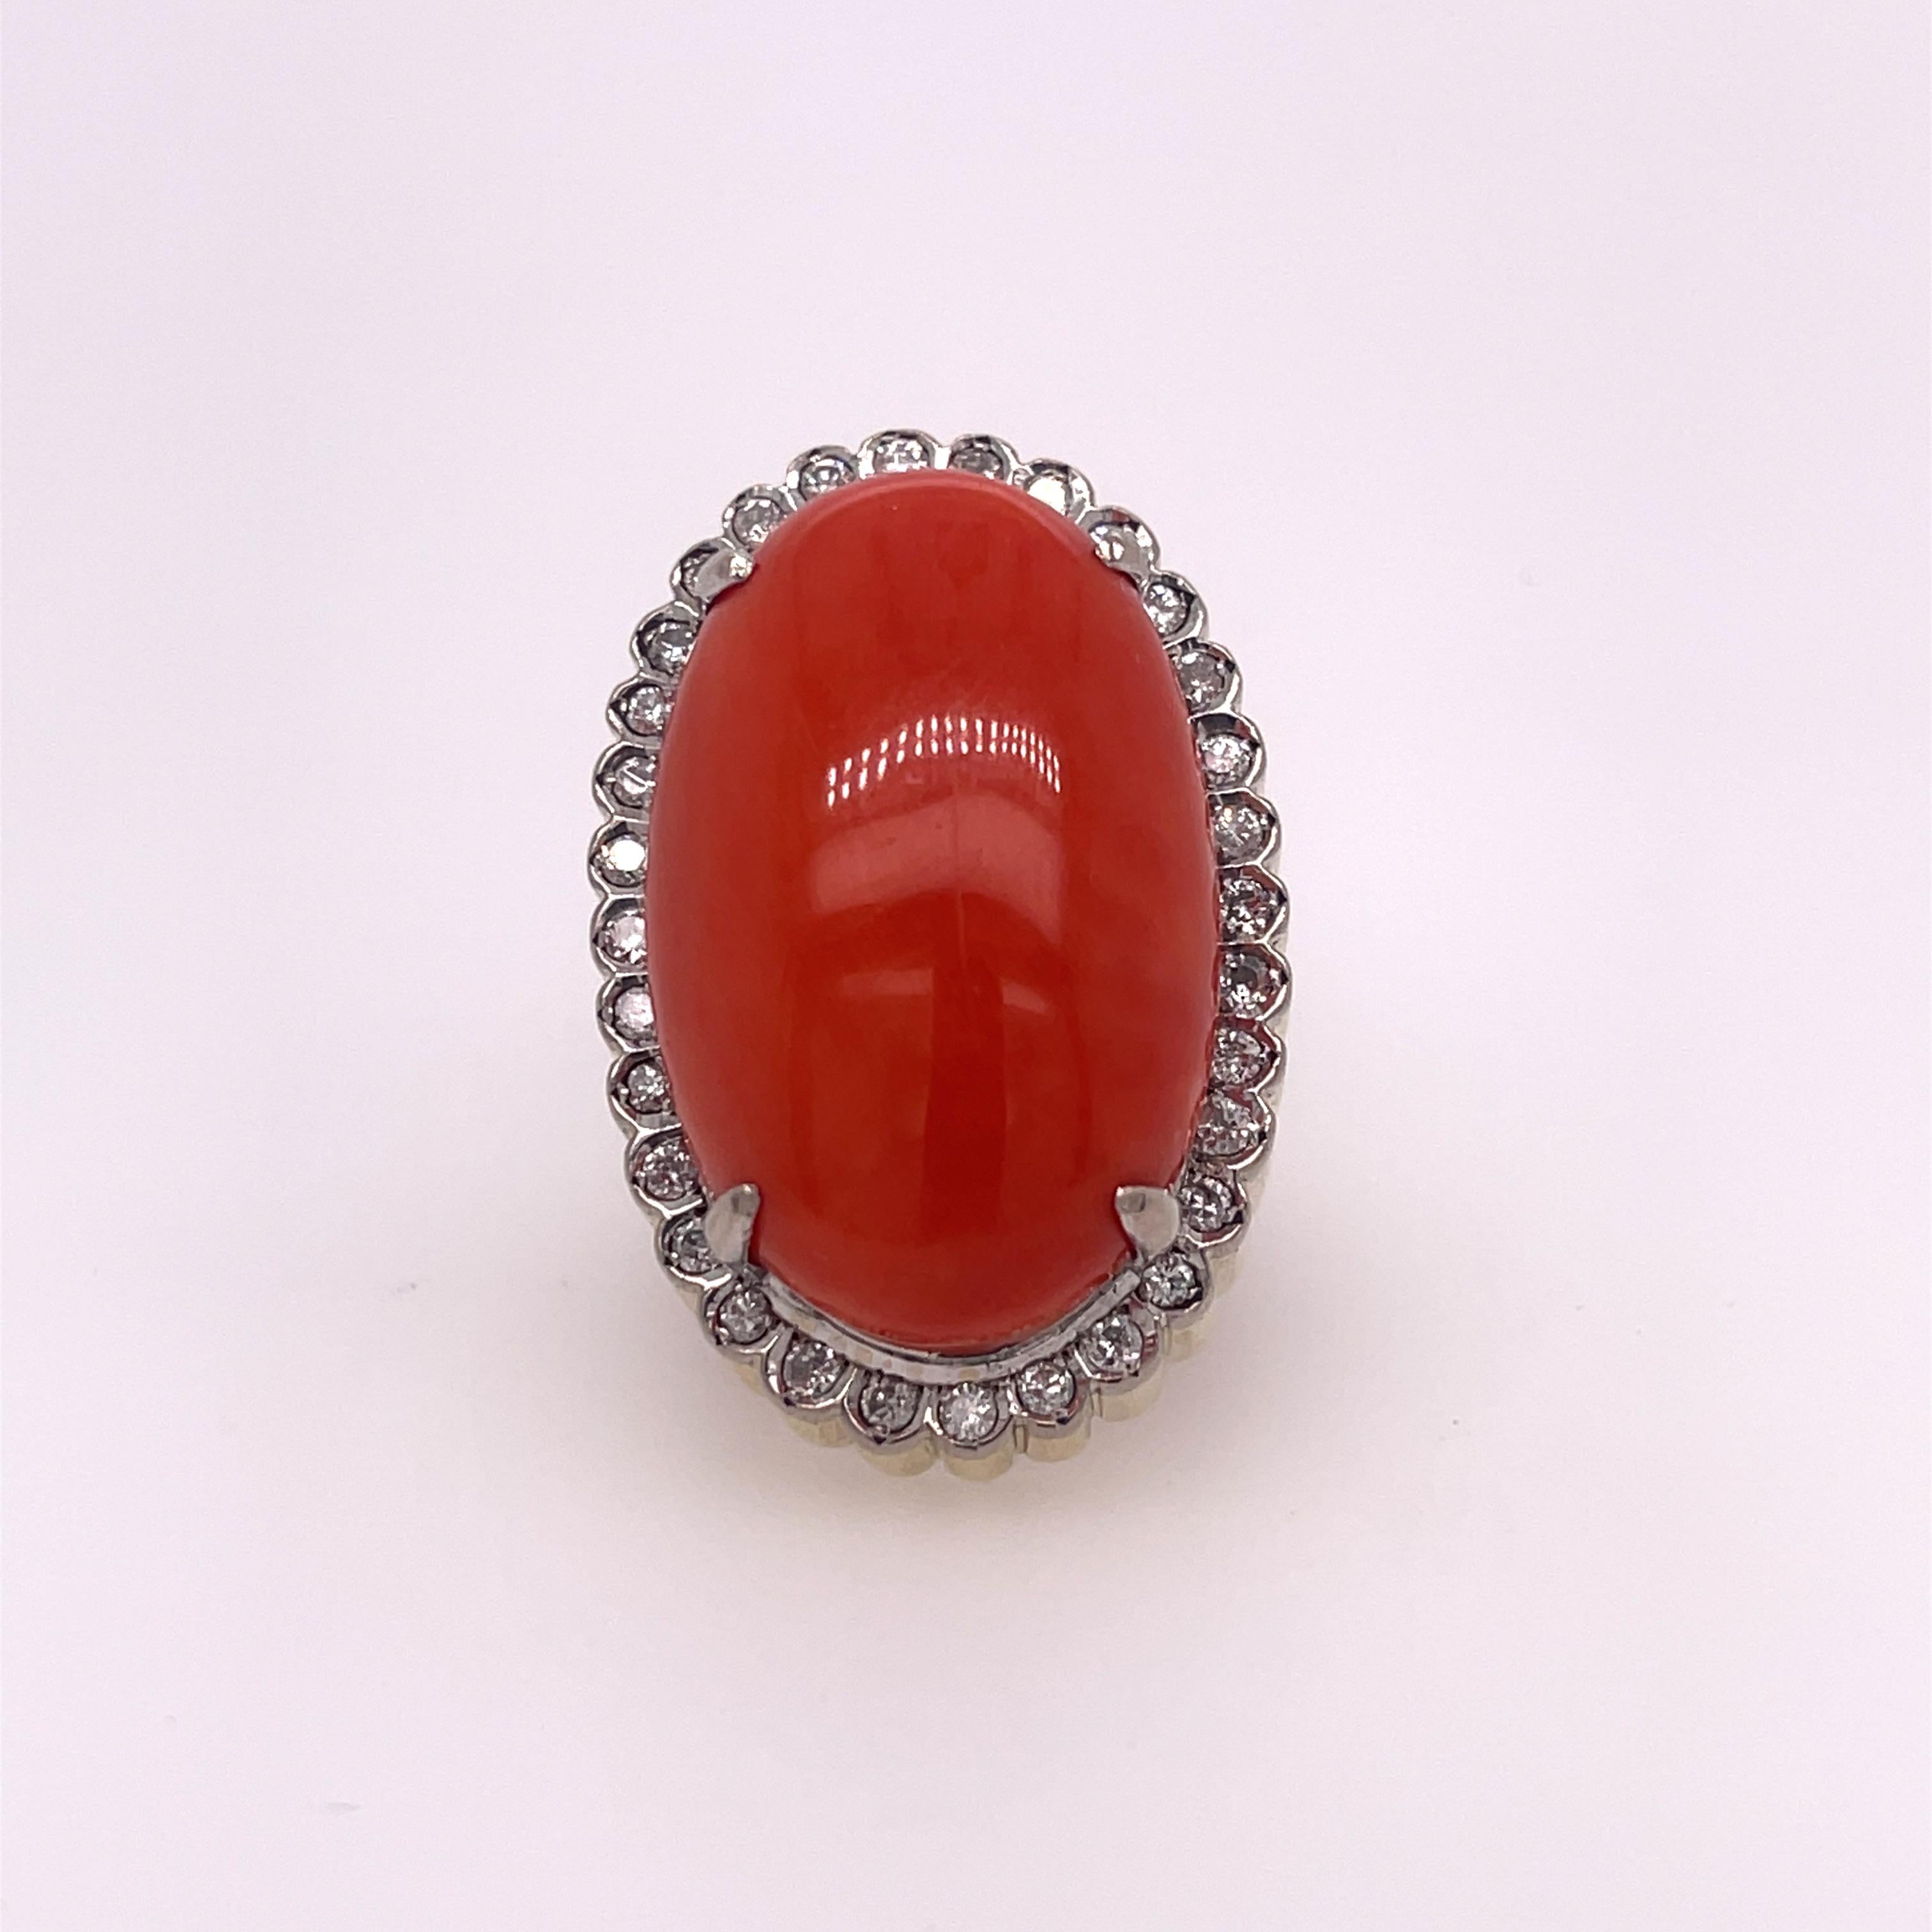 Oval coral ring with a diamond halo set in 14K yellow gold. The coral is approximately 26mm x 17mm.
Approximately 0.50ctw of diamonds.  Stamped 585 14k.